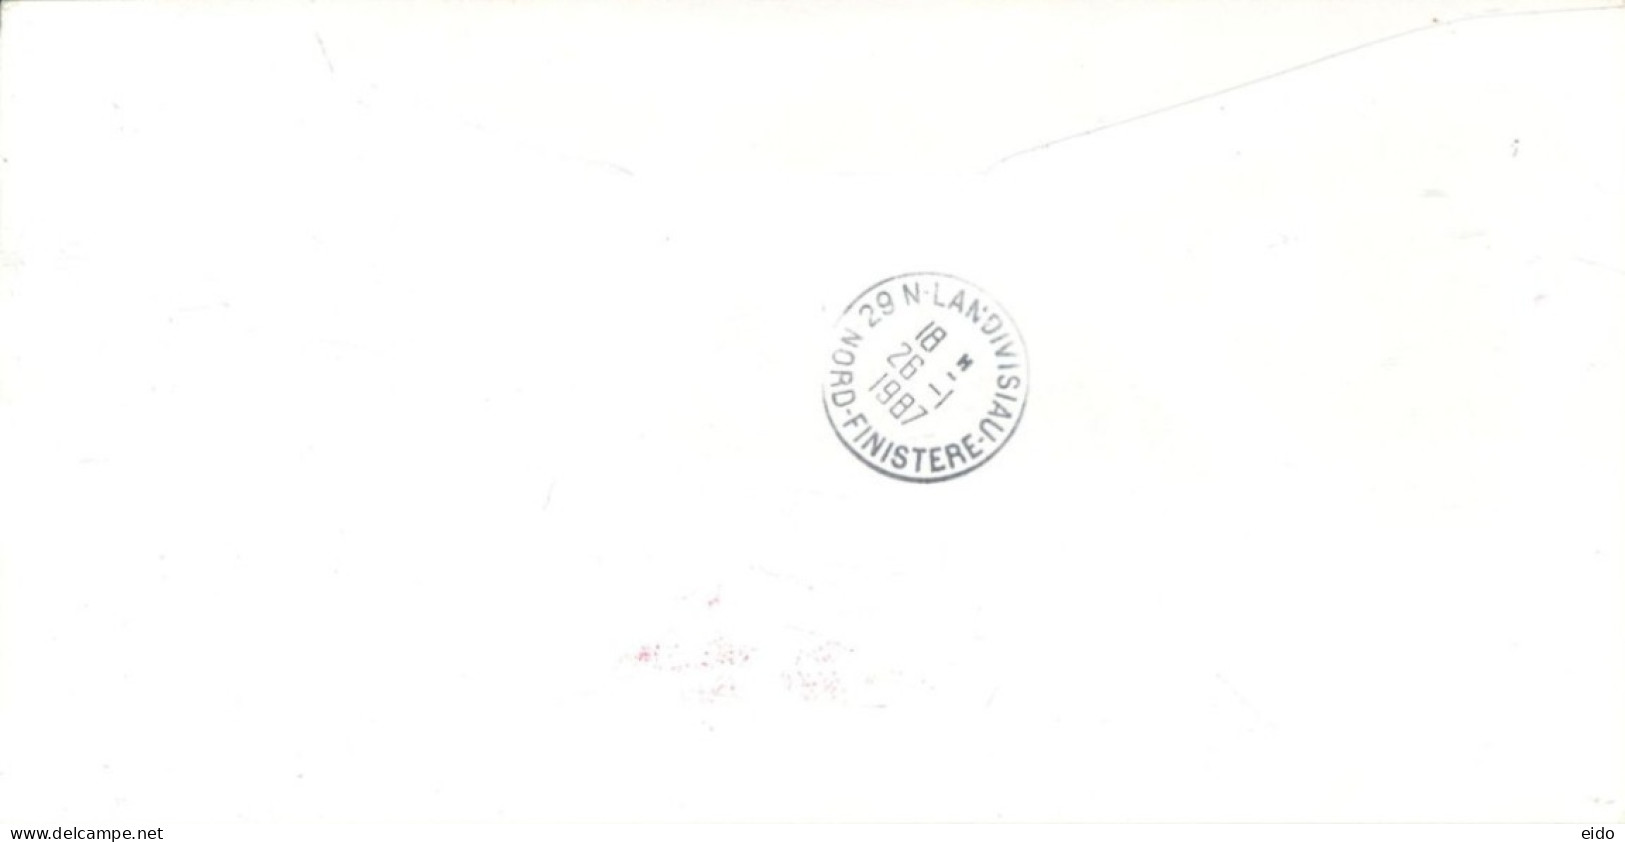 AUSTRALIAN ANTARCTIC TERRITORY - 1986, SPECIAL STAMP COVER SIGNED BY ADELICOP XXIV SENT TO FRANCE. - Storia Postale